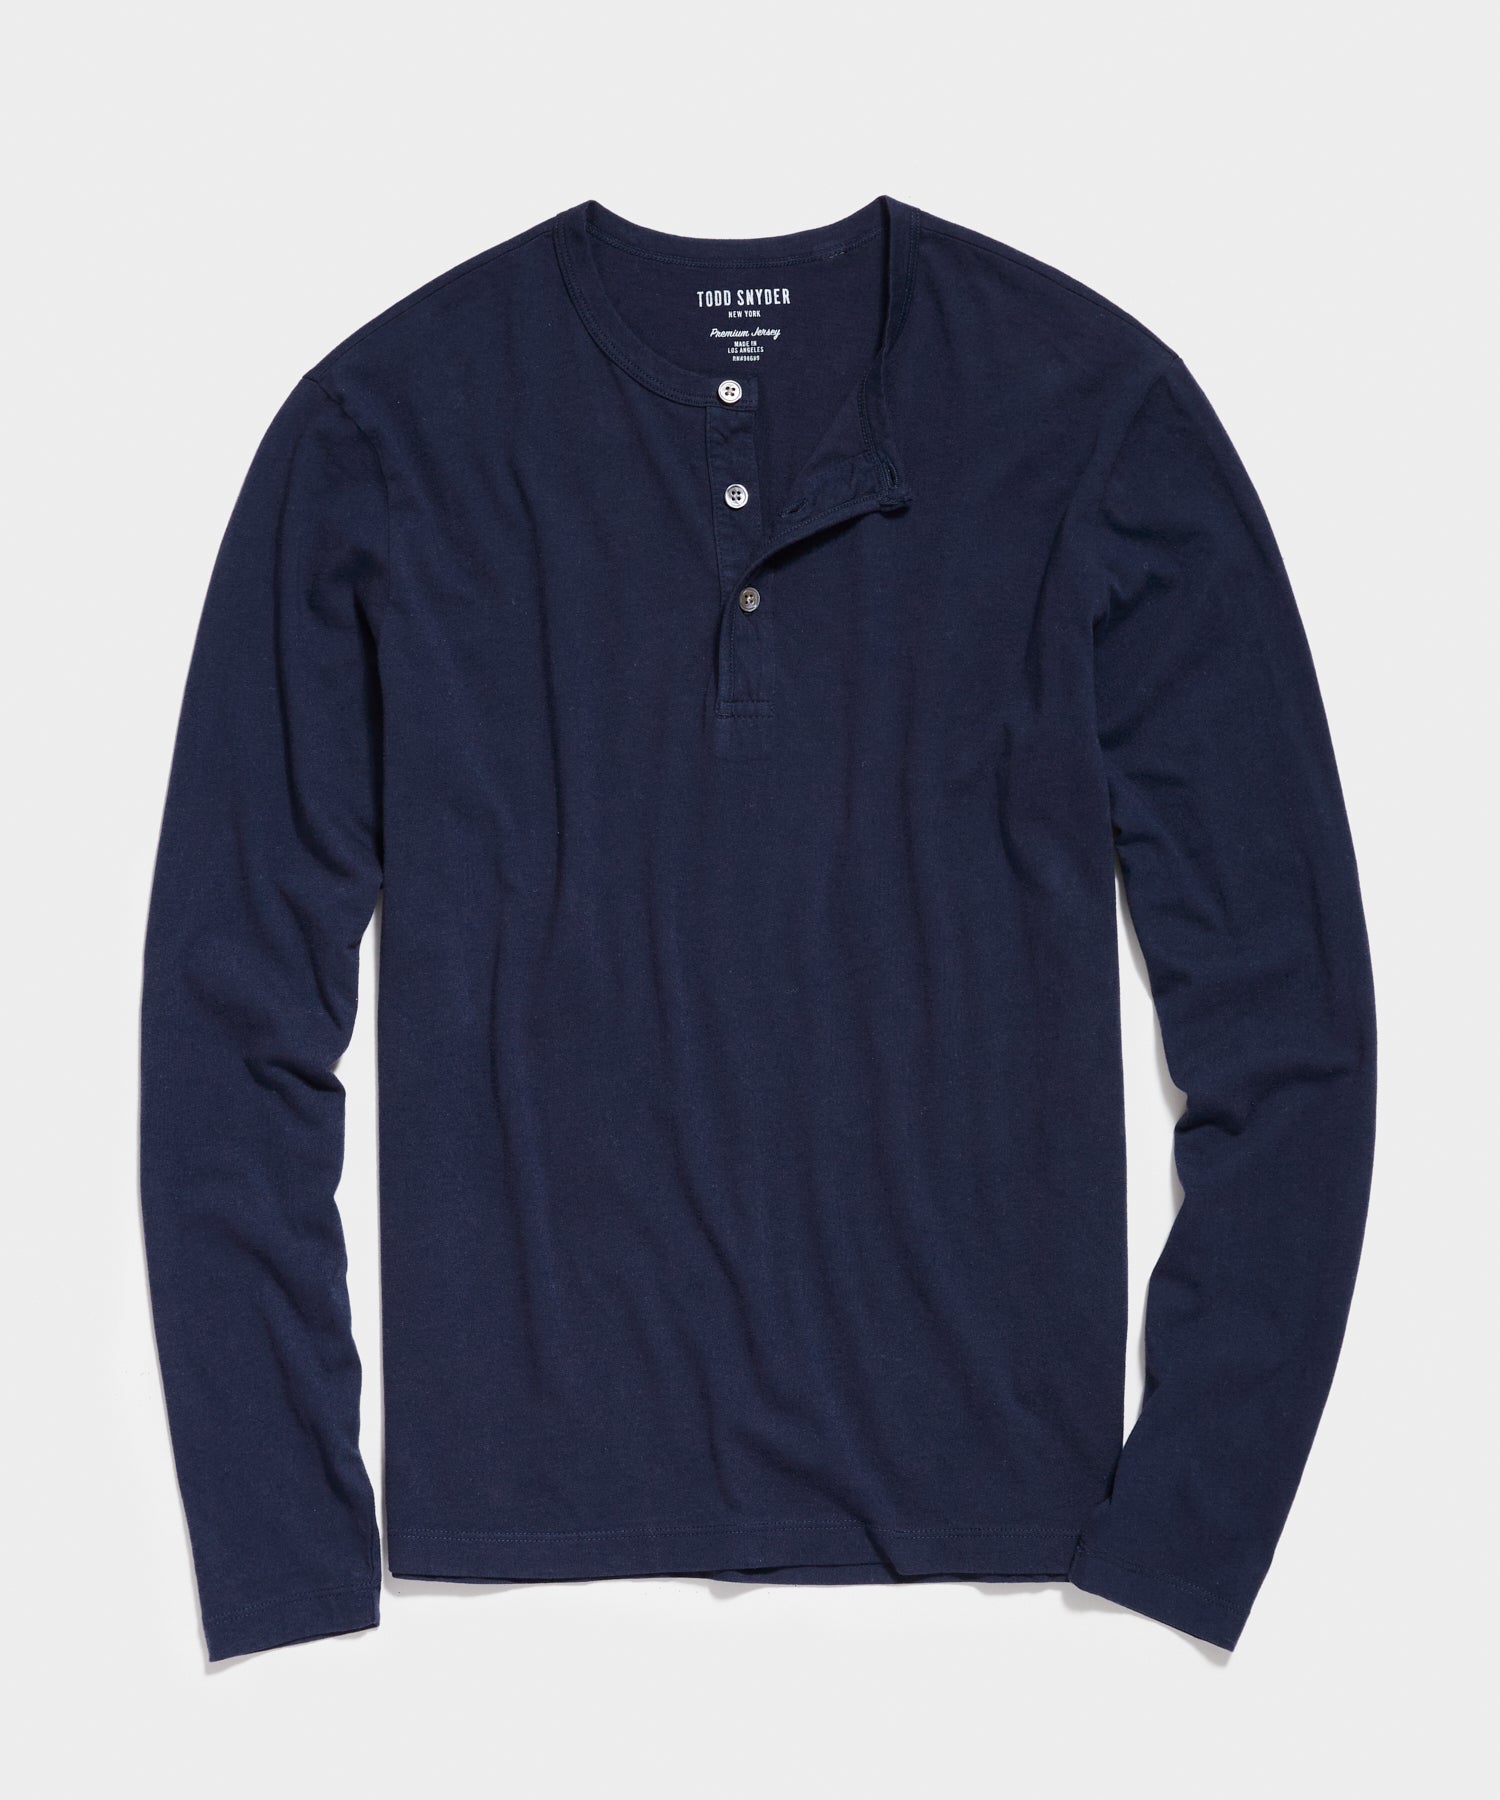 Made in L.A. Long Sleeve Premium Jersey Henley in Navy